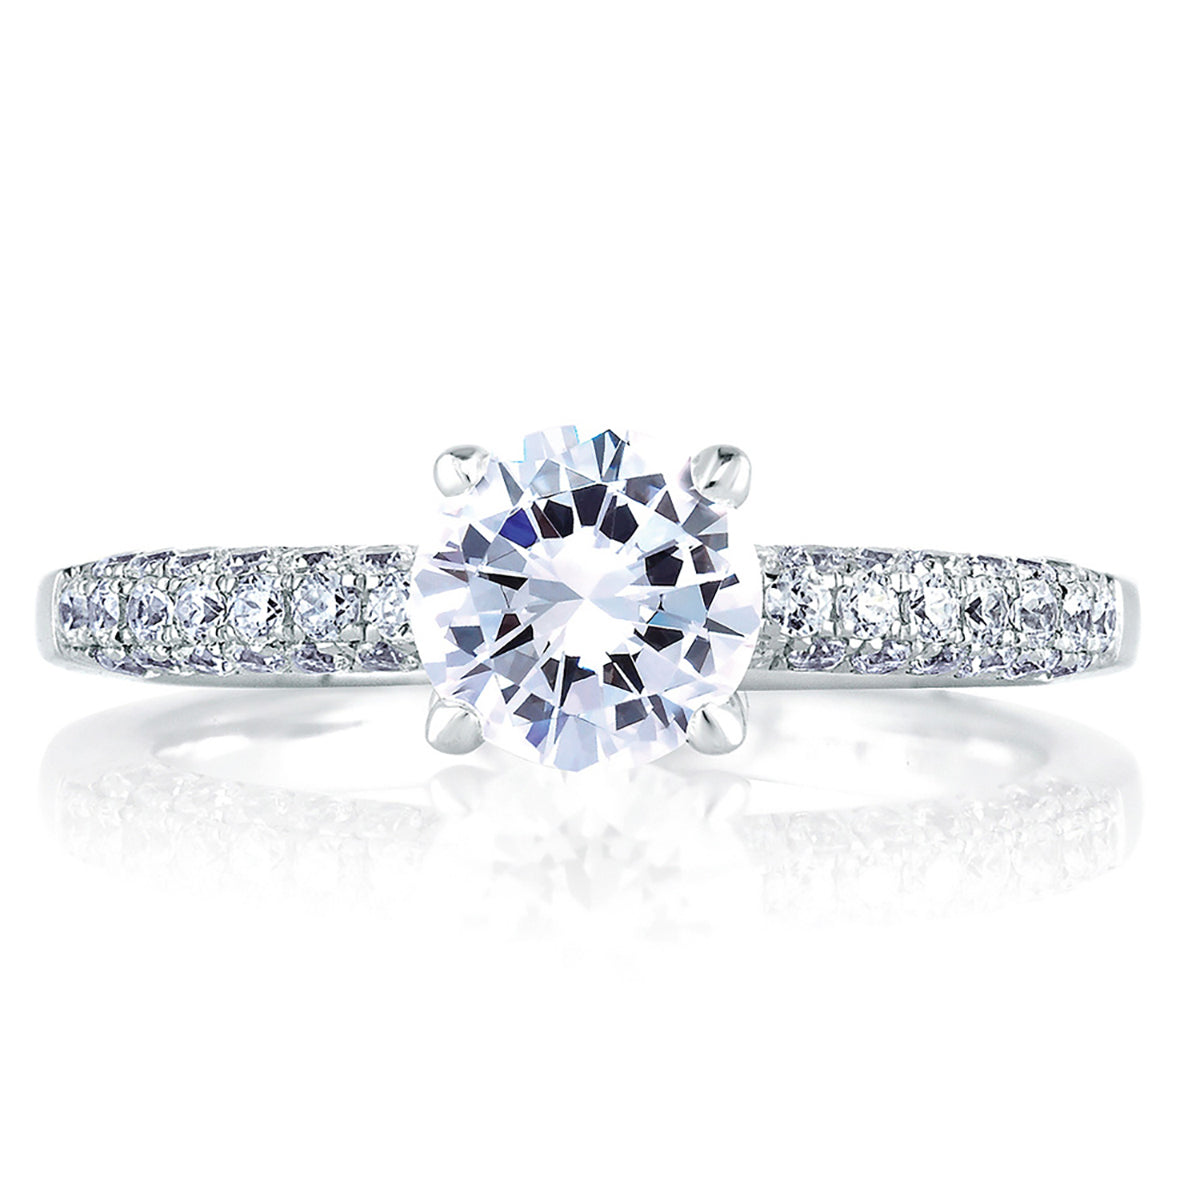 1.83 ctw. Pear Cut Diamond Engagement Ring in a French Pave Setting -  ER-105-014